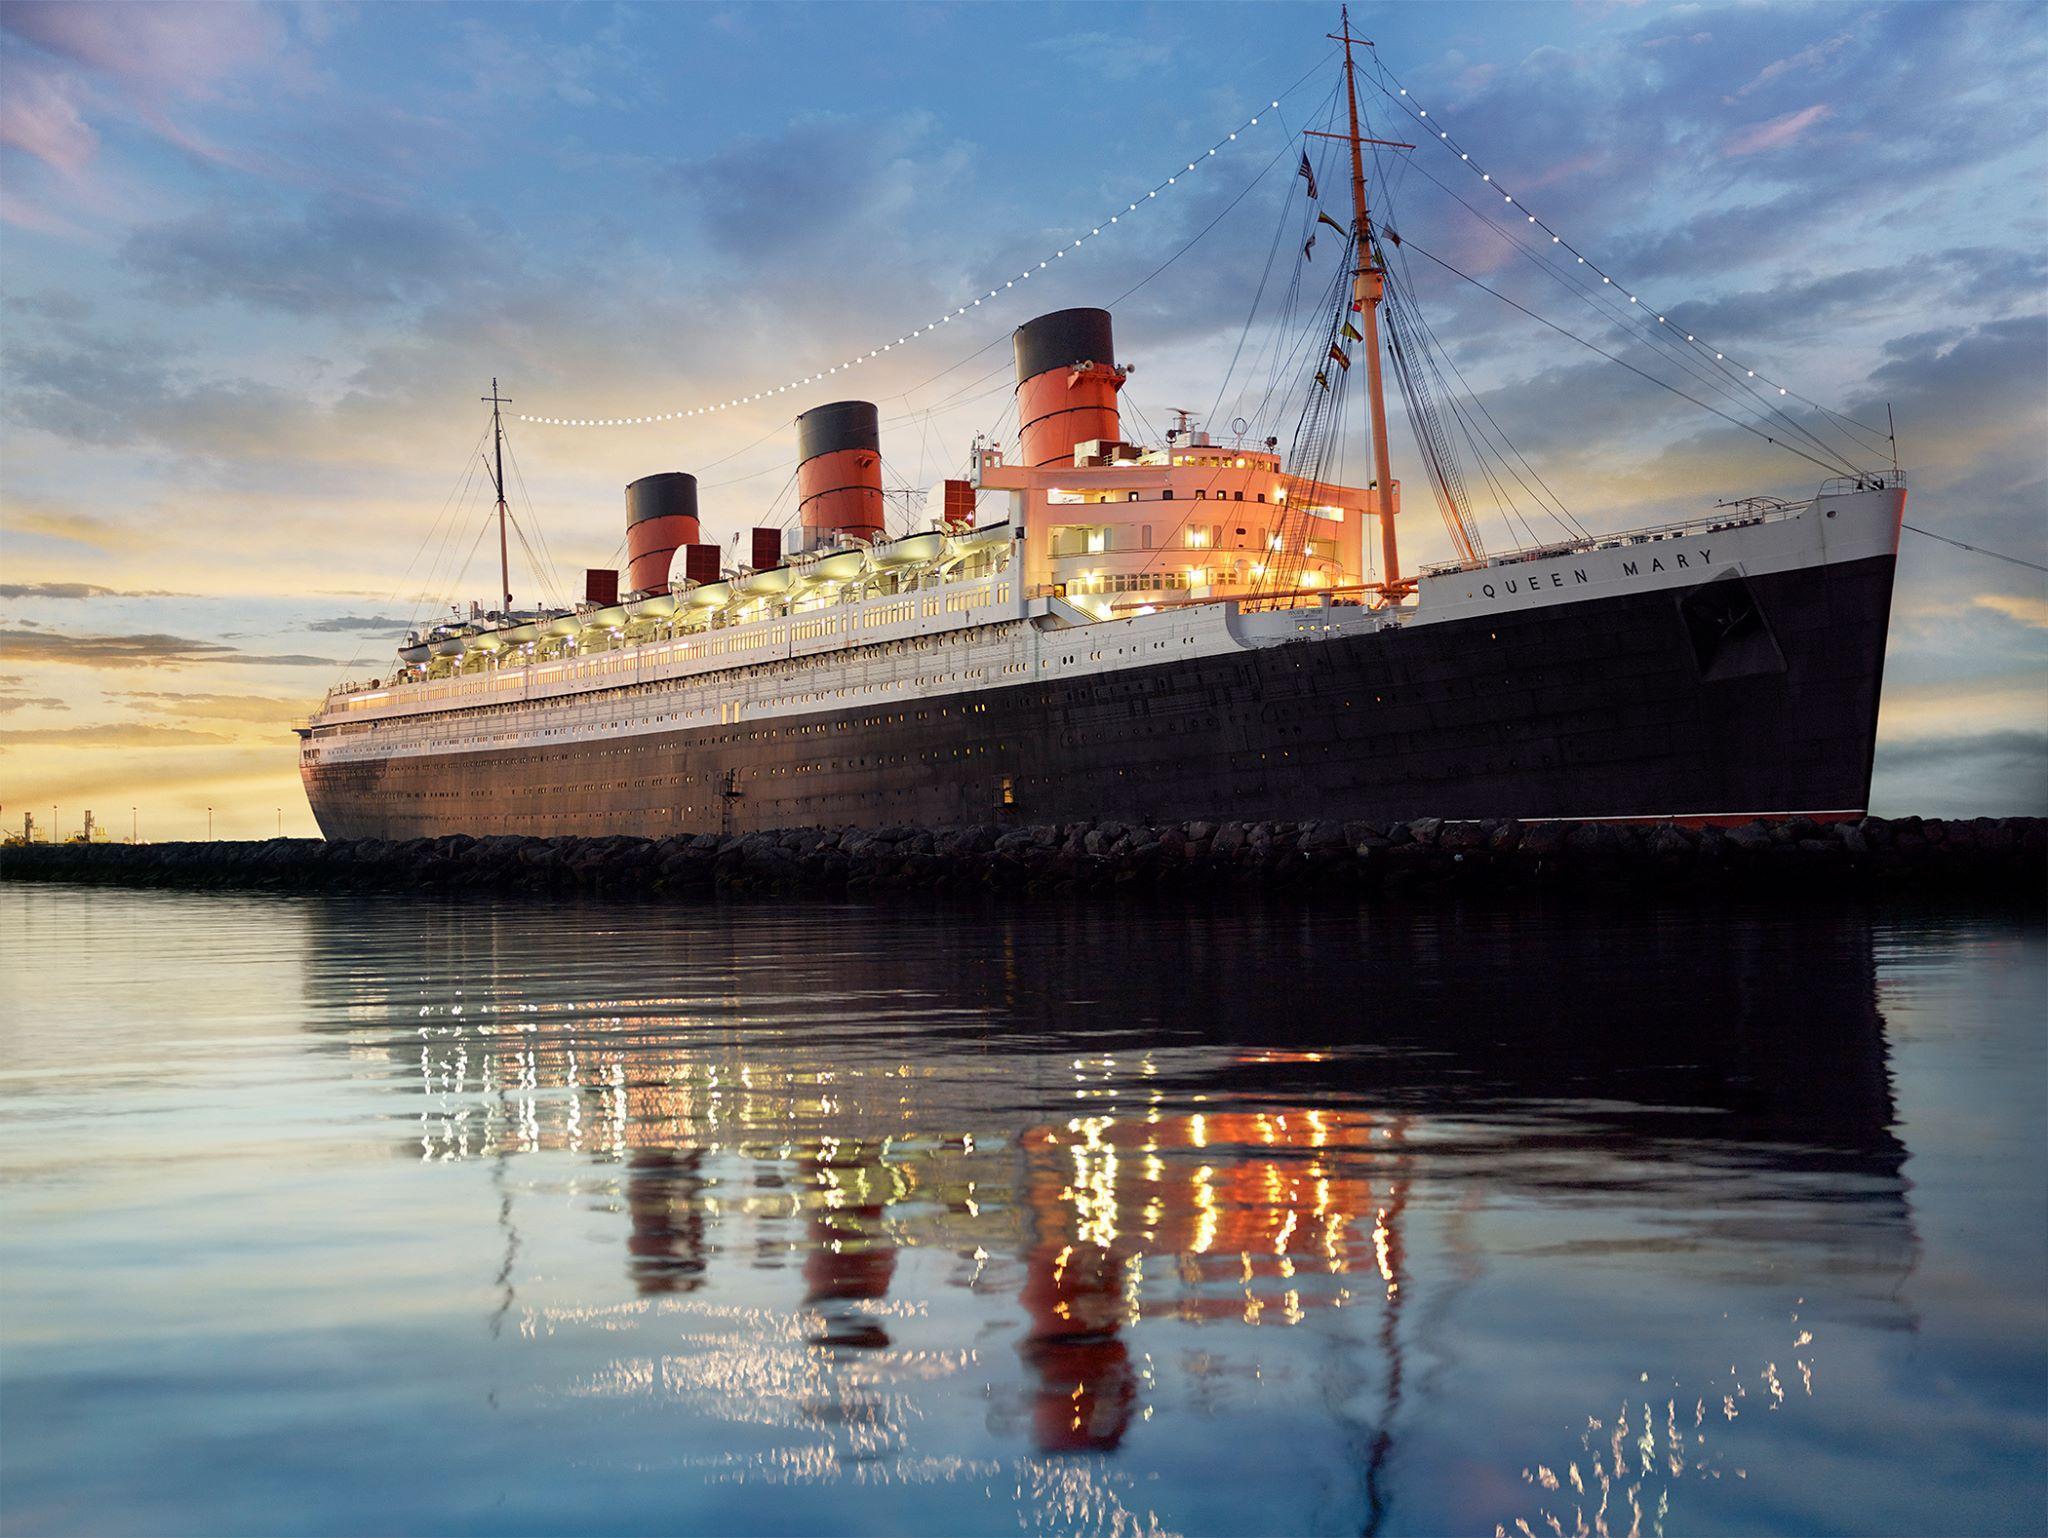 Relive the glory days of ocean liners on the Queen Mary